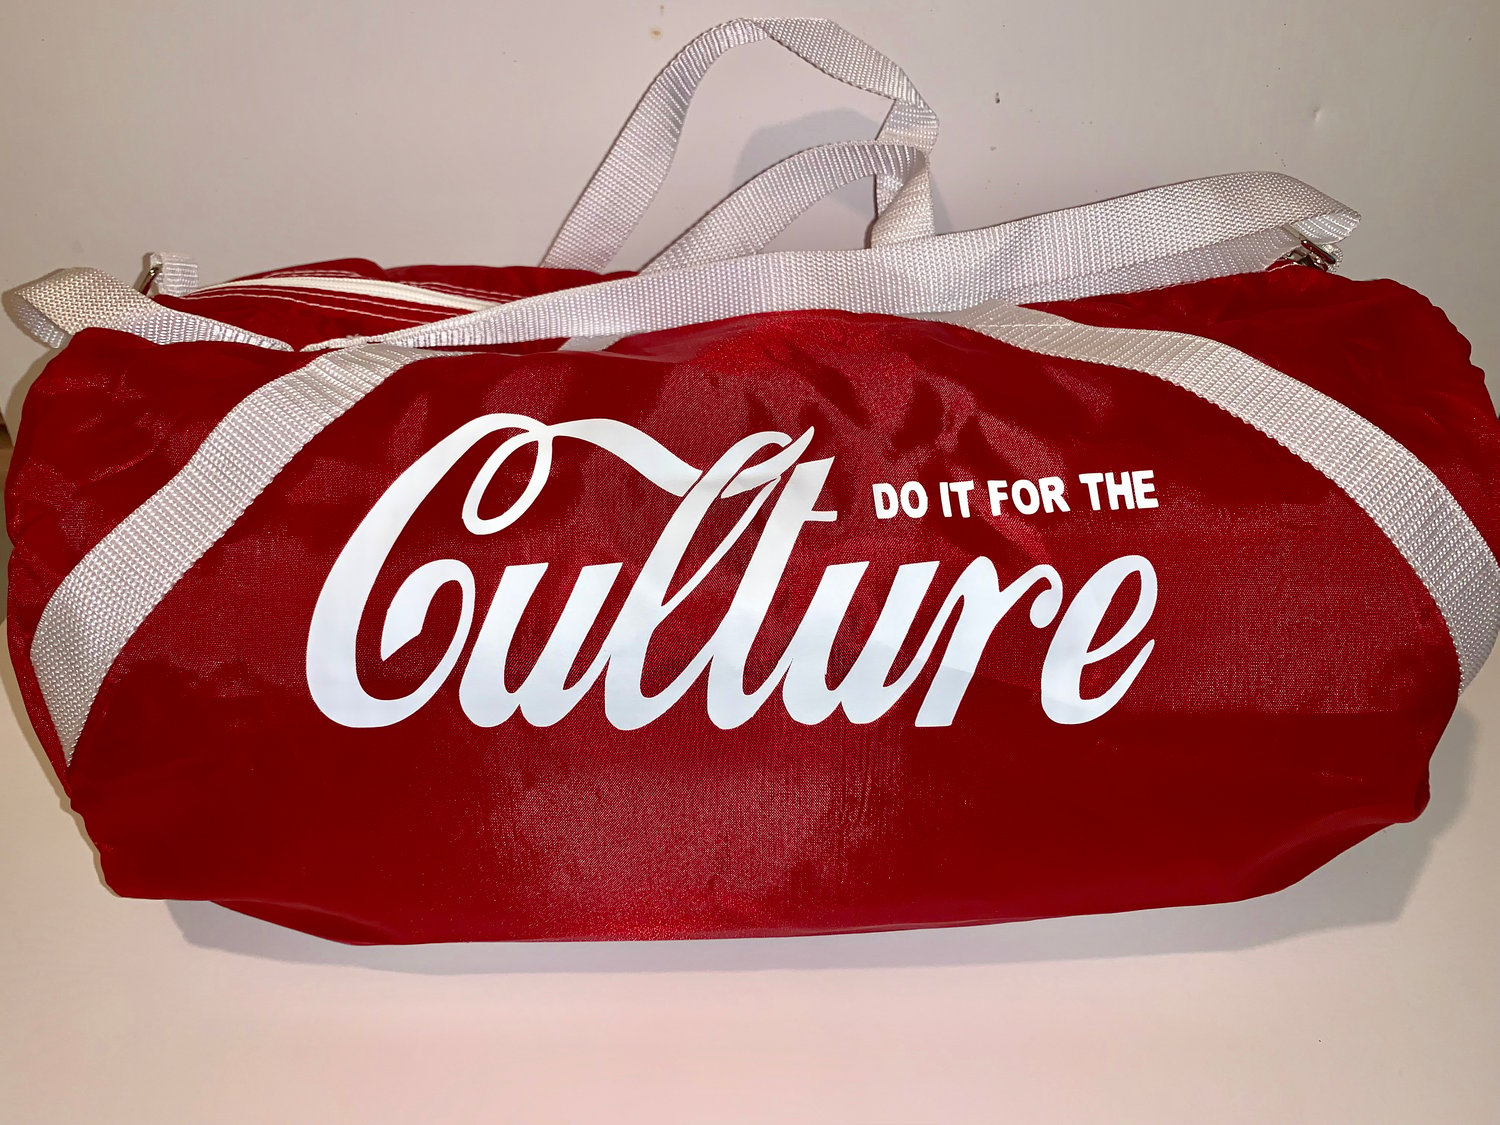 Live Life In Color Large Duffle Bag – Designs 4 The Culture Blanks